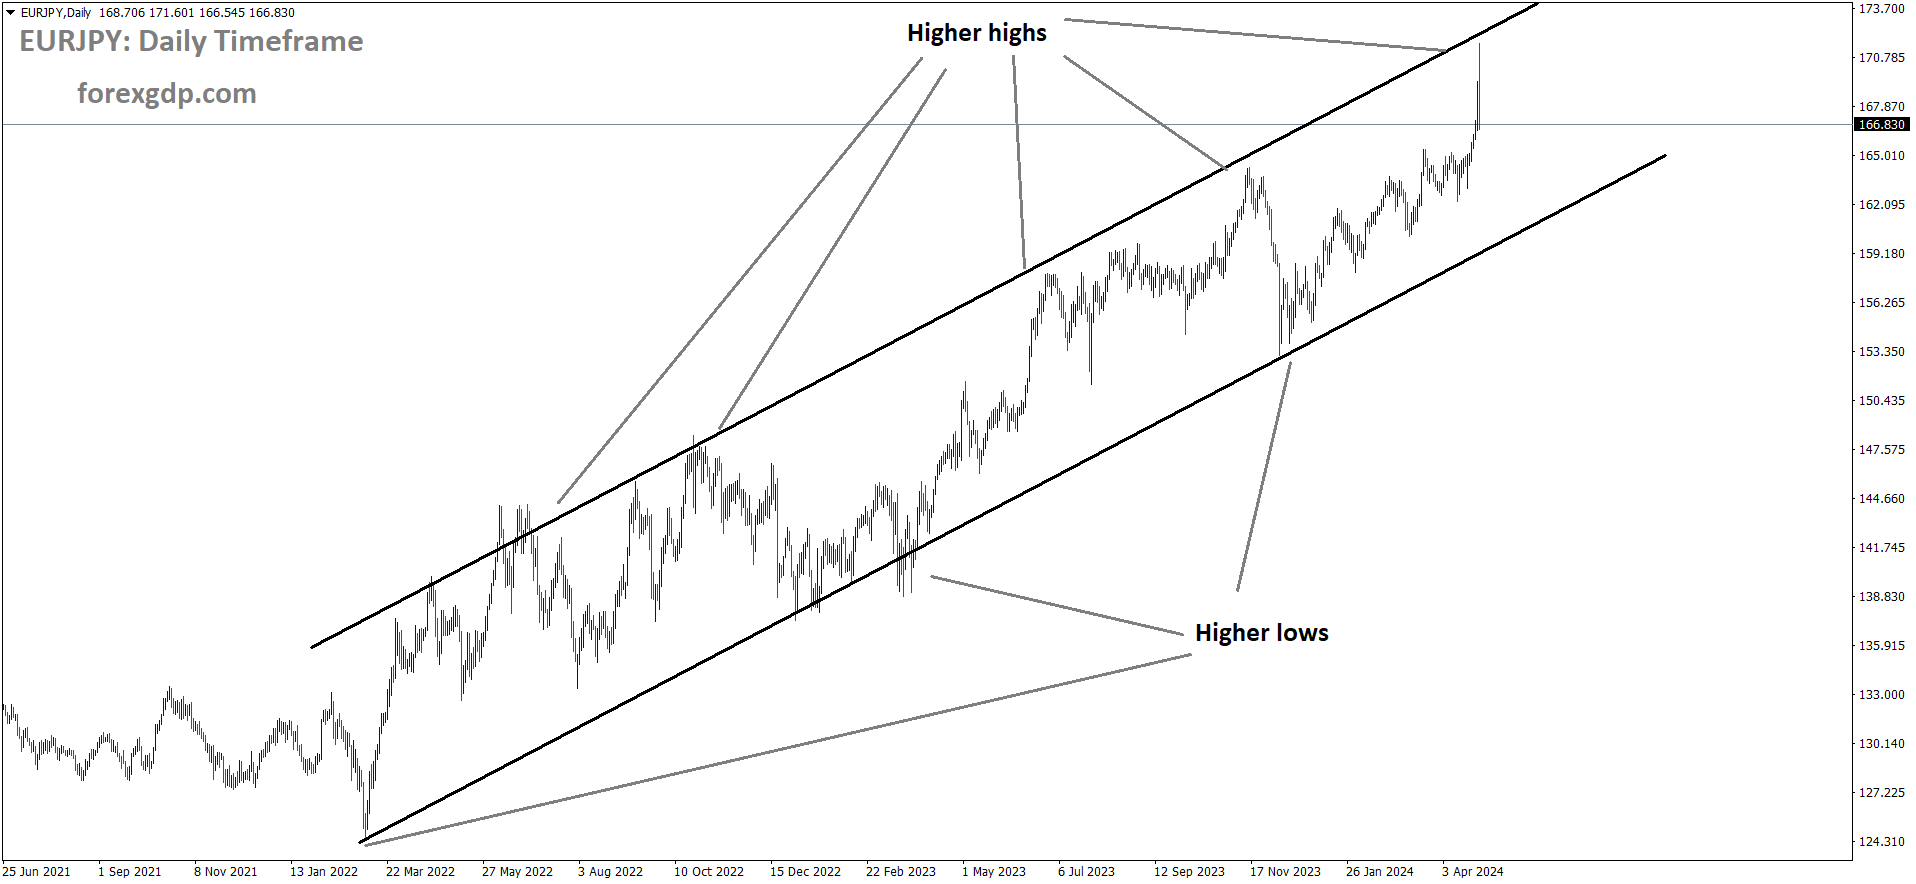 EURJPY is moving in Ascending channel and market has reached higher high area of the channel